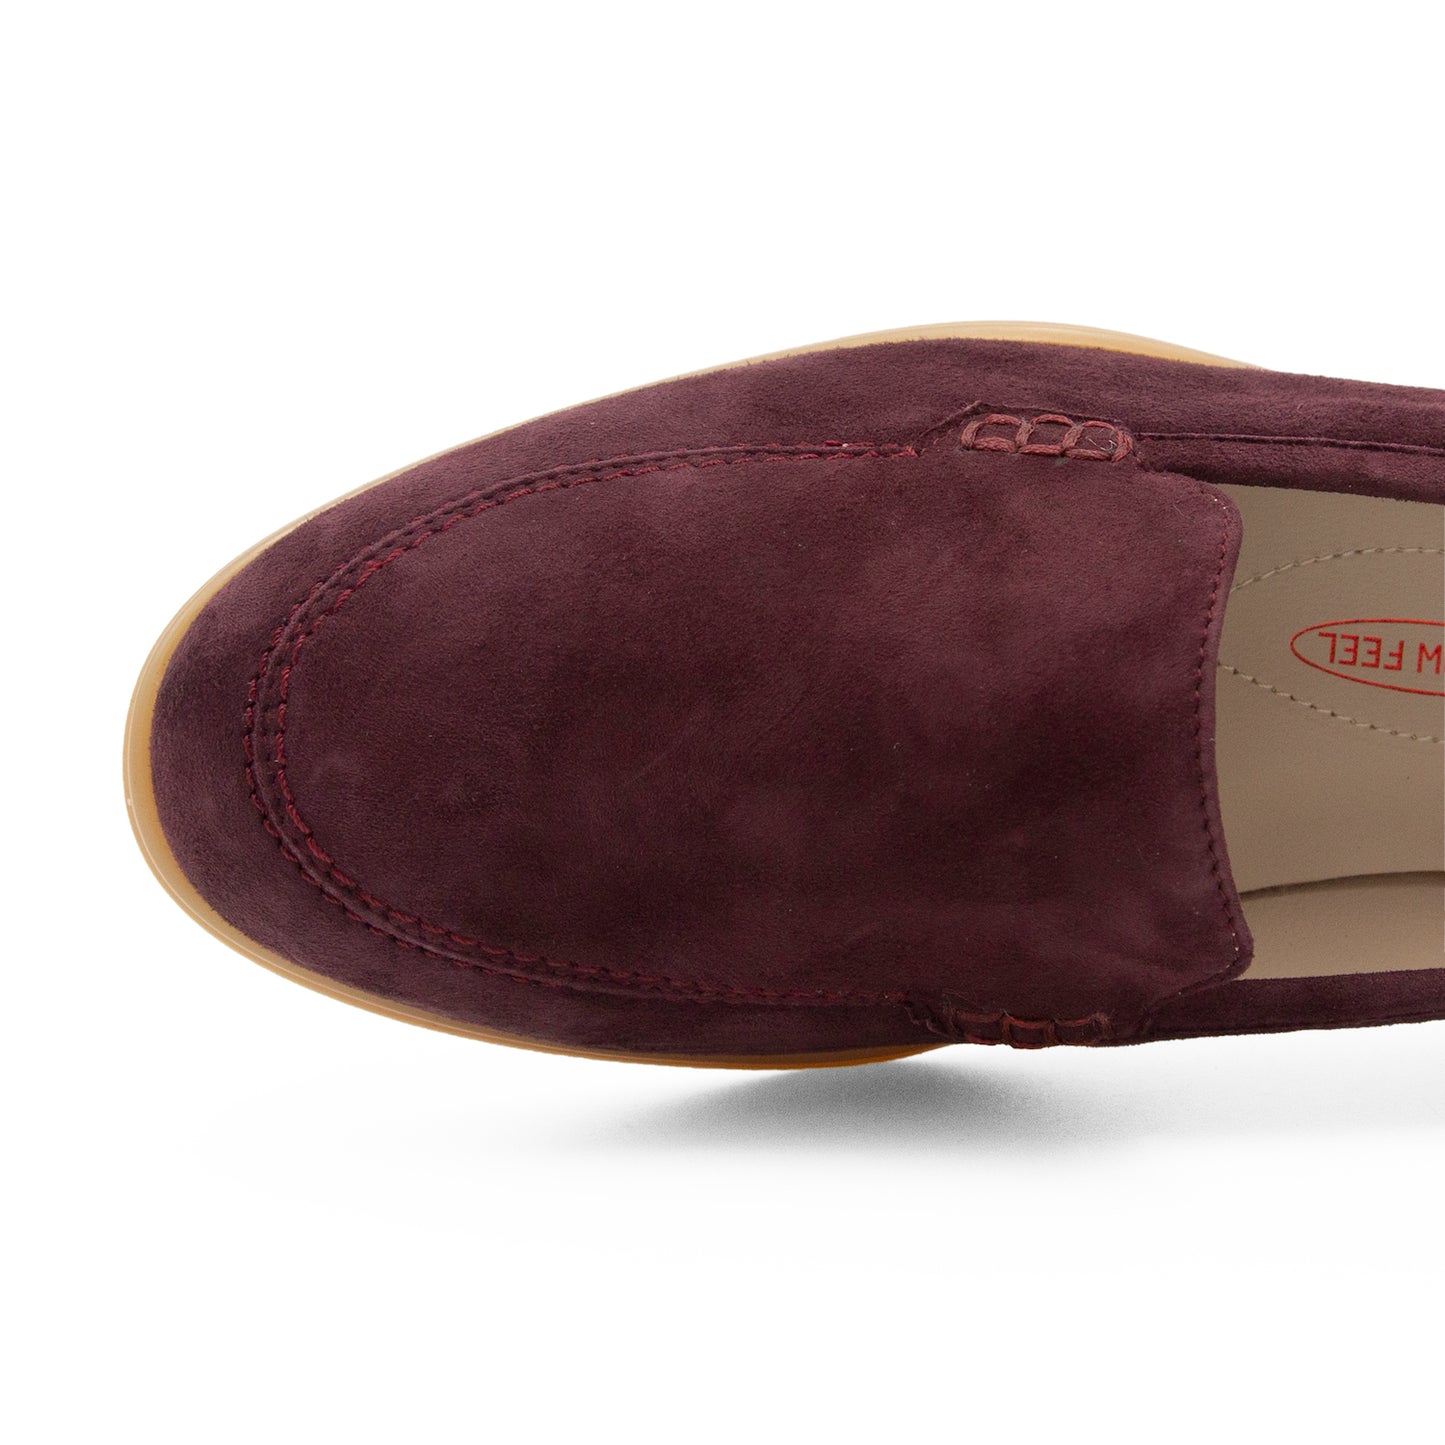 Rombo Loafer Prug Csh/Bei Sole